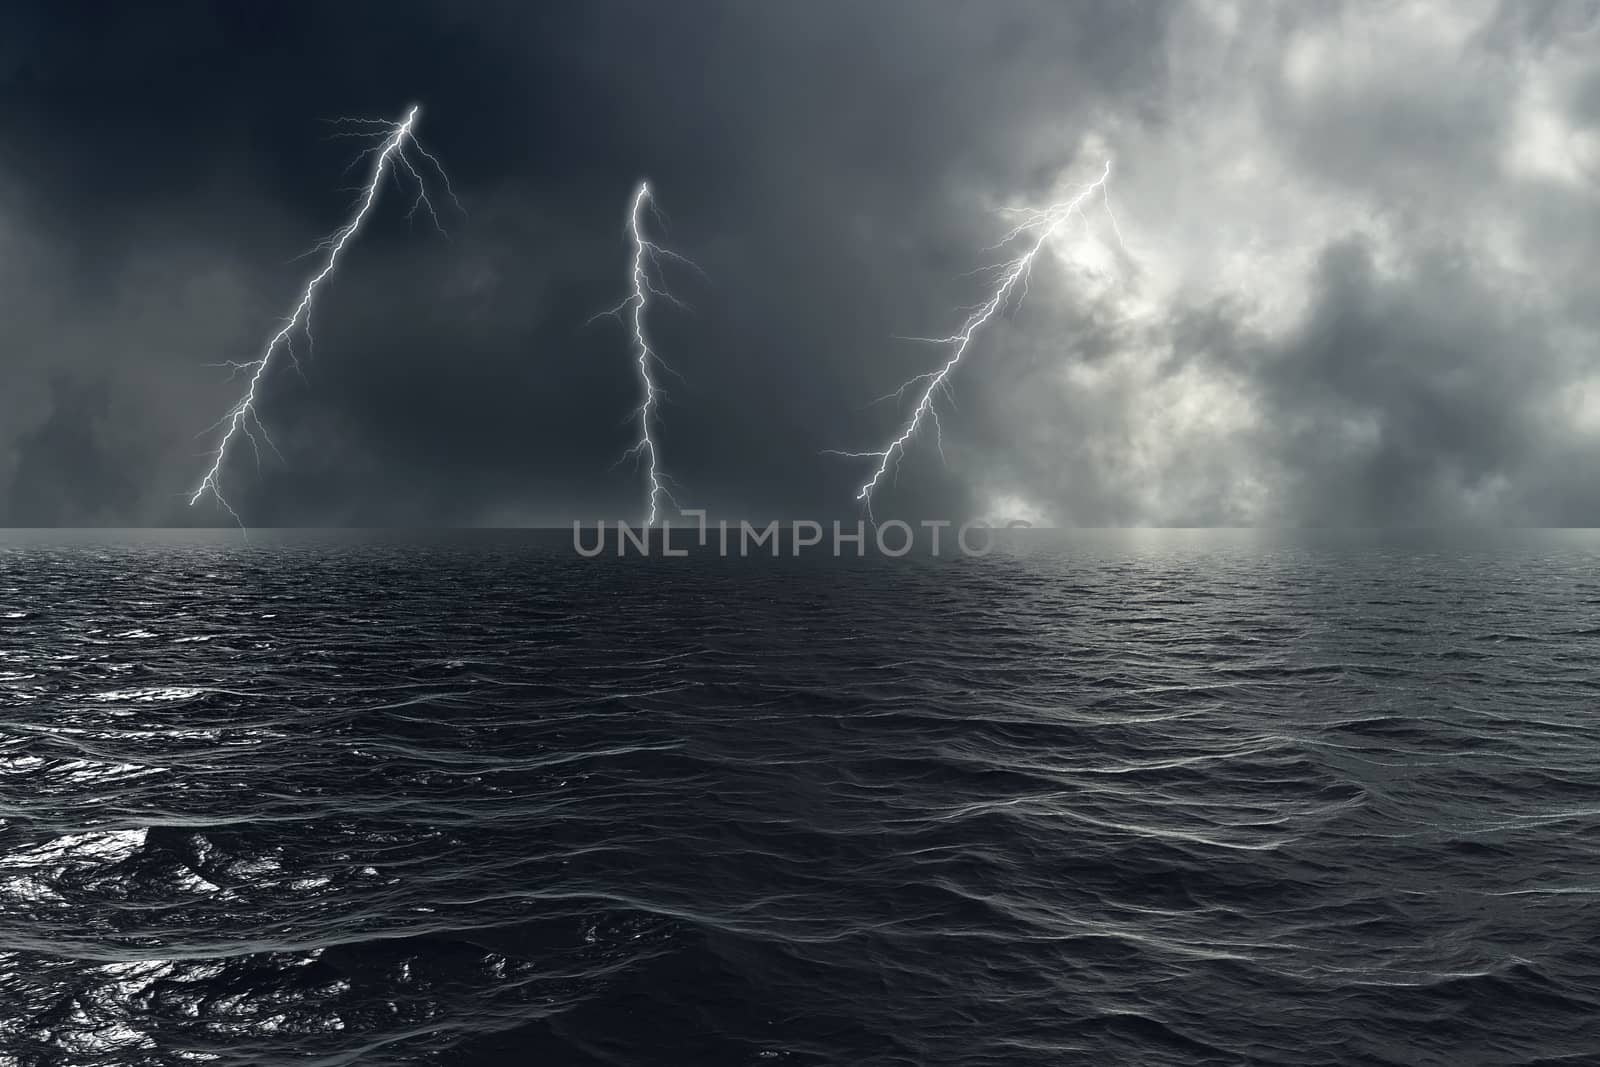 Stormy weather on the ocean with lightning